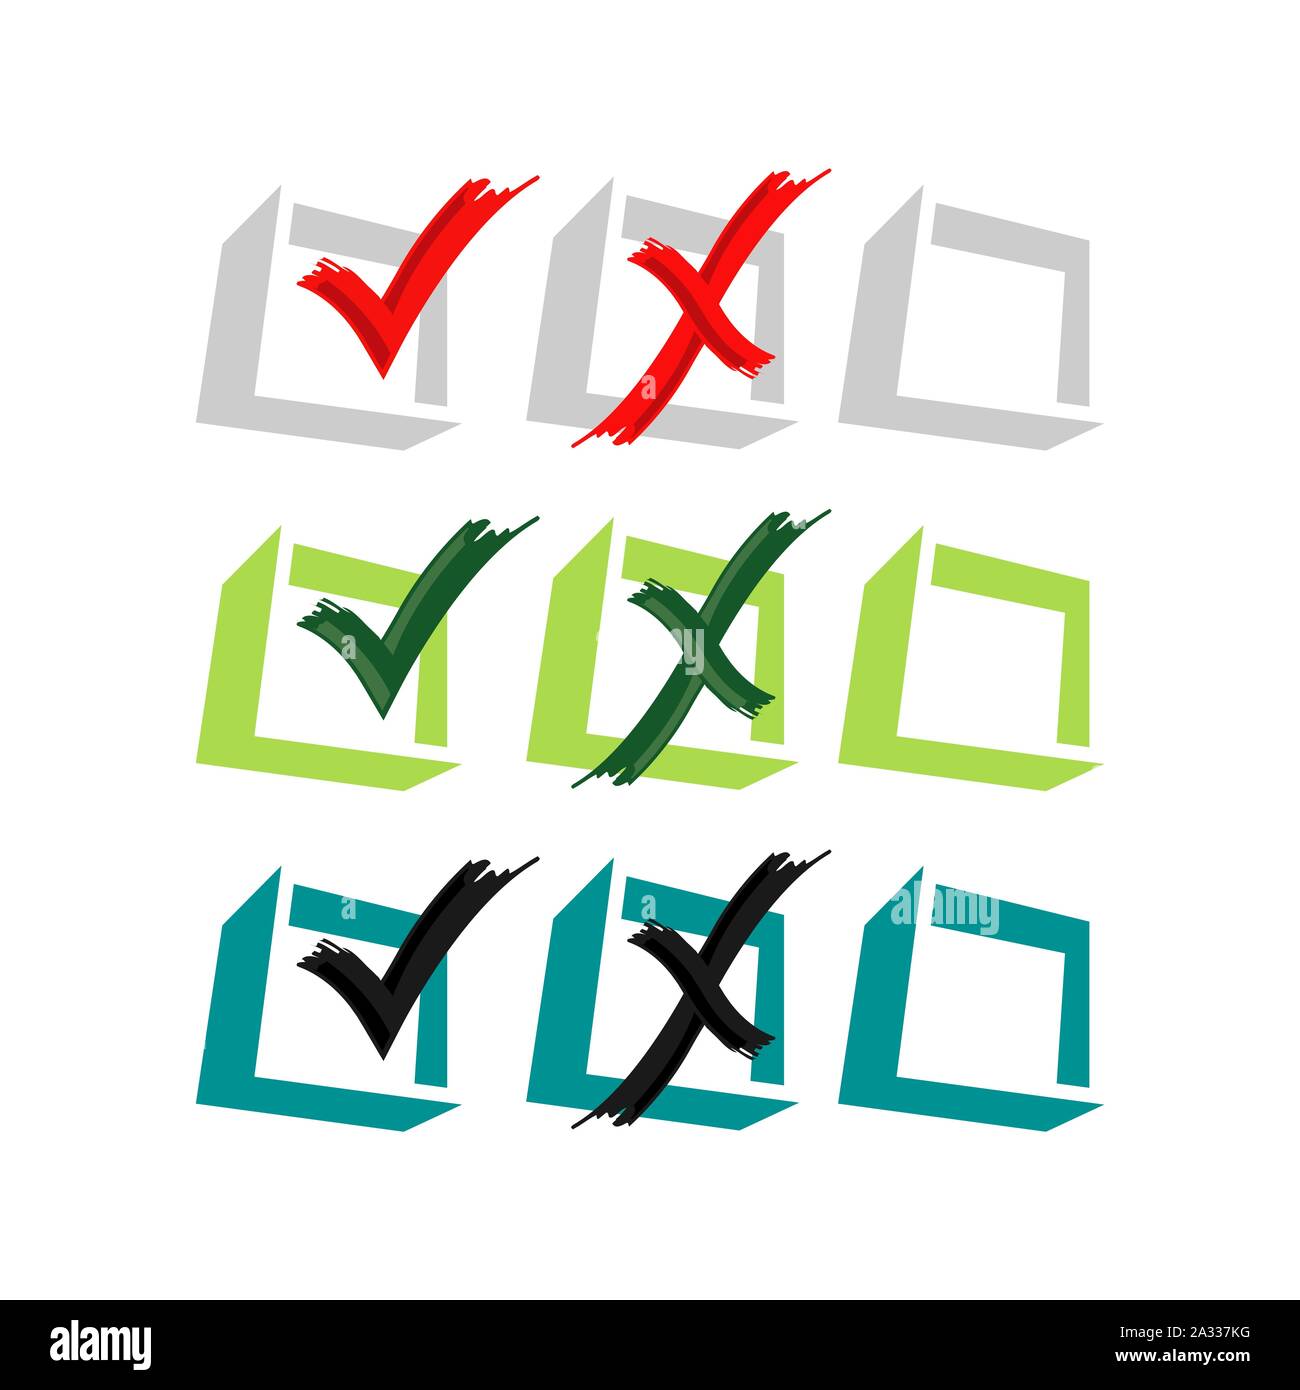 voting Yes or No vector logo design False or True icon in trendy design style Stock Vector